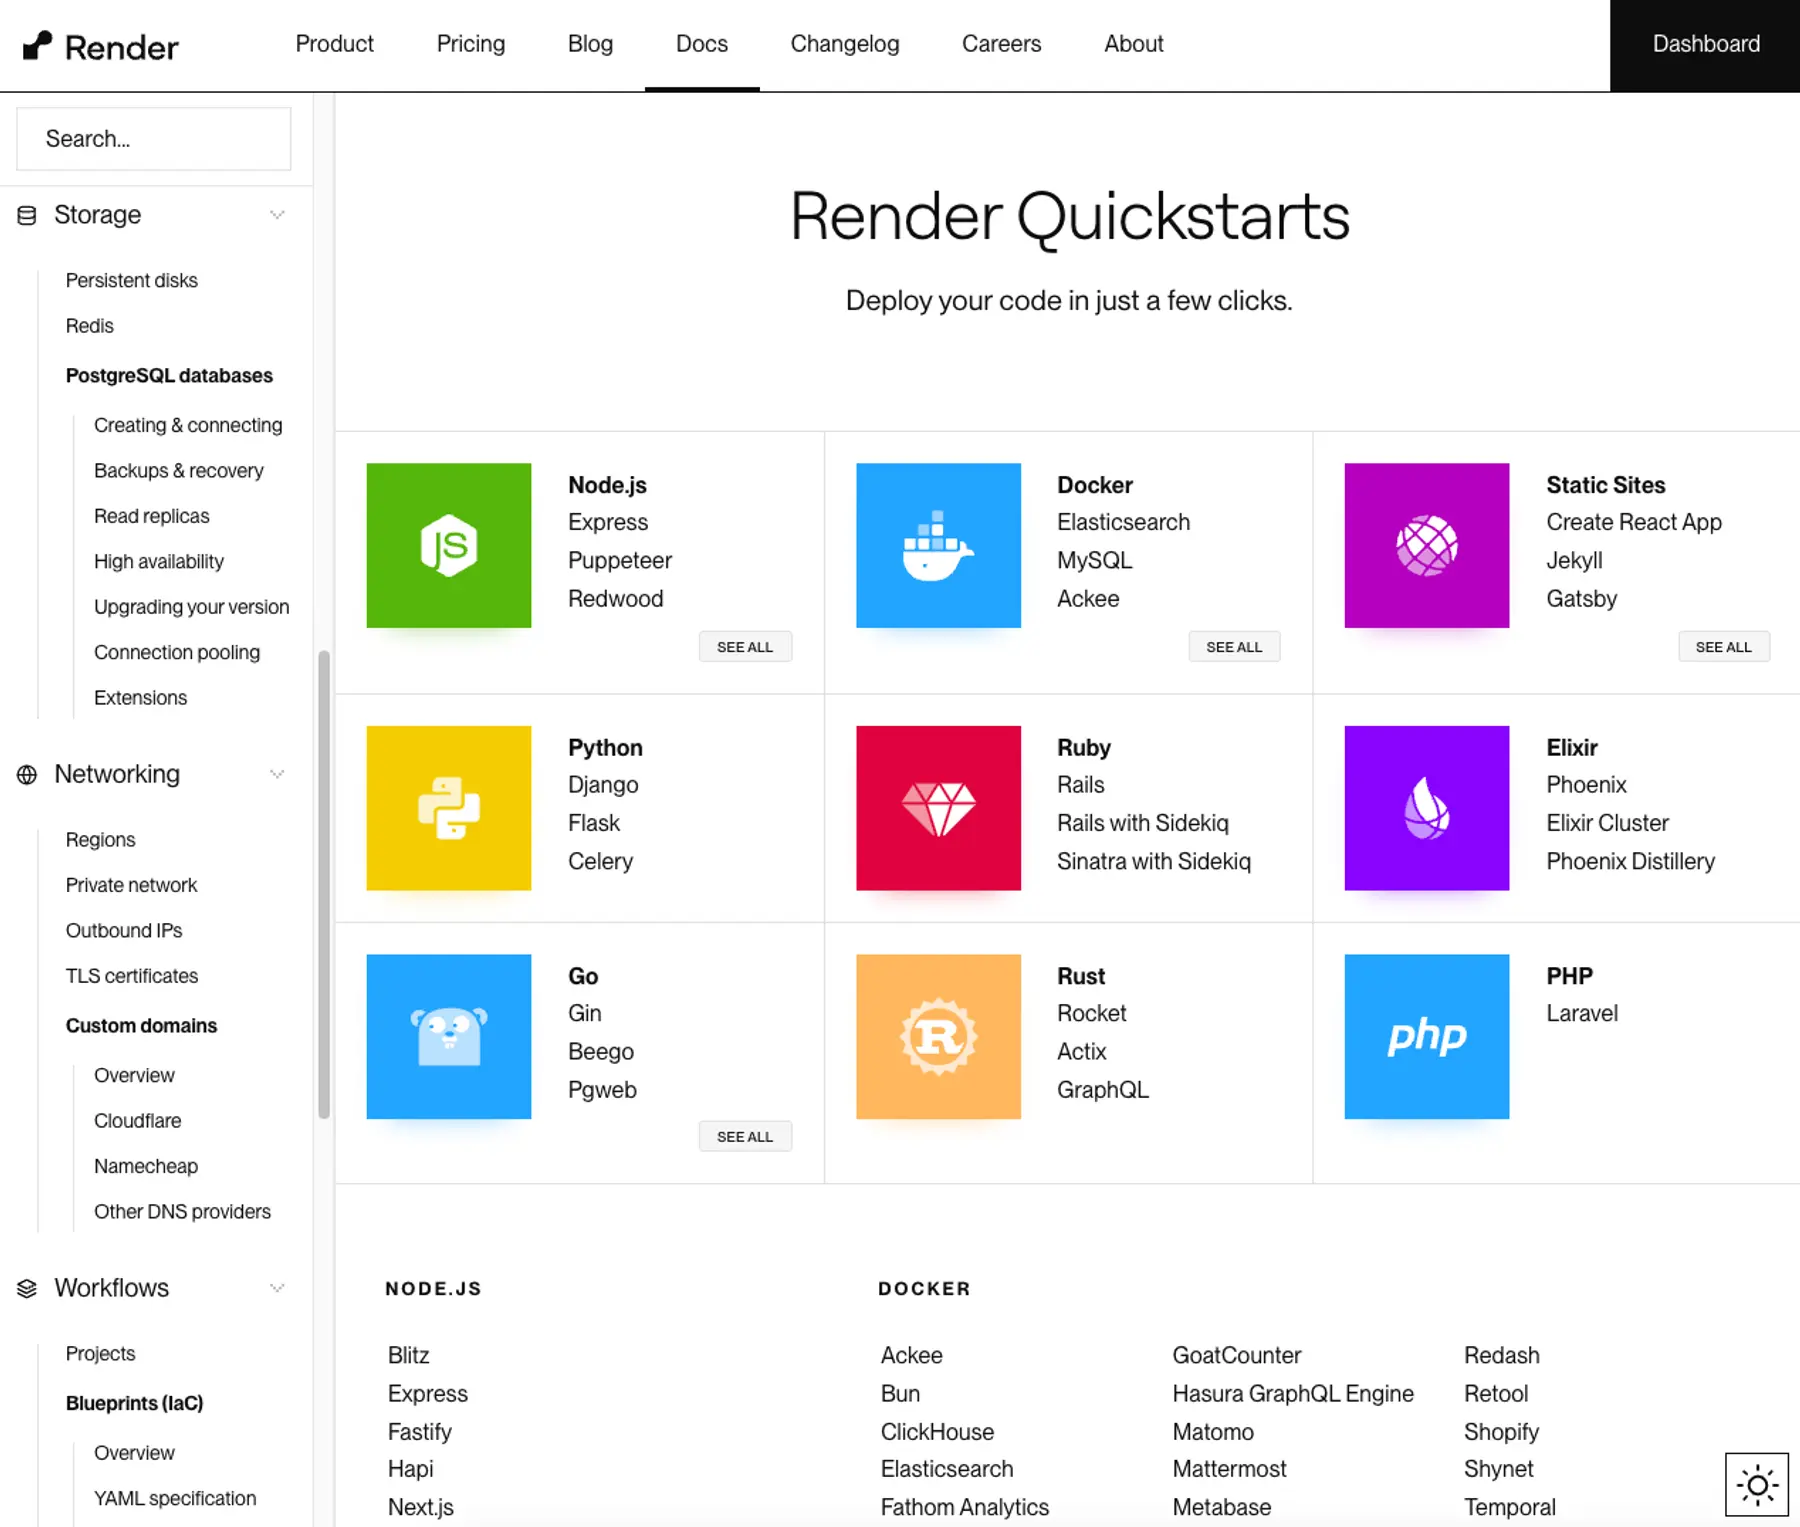 Render's documentation includes quickstarts to help you deploy common frameworks and applications.